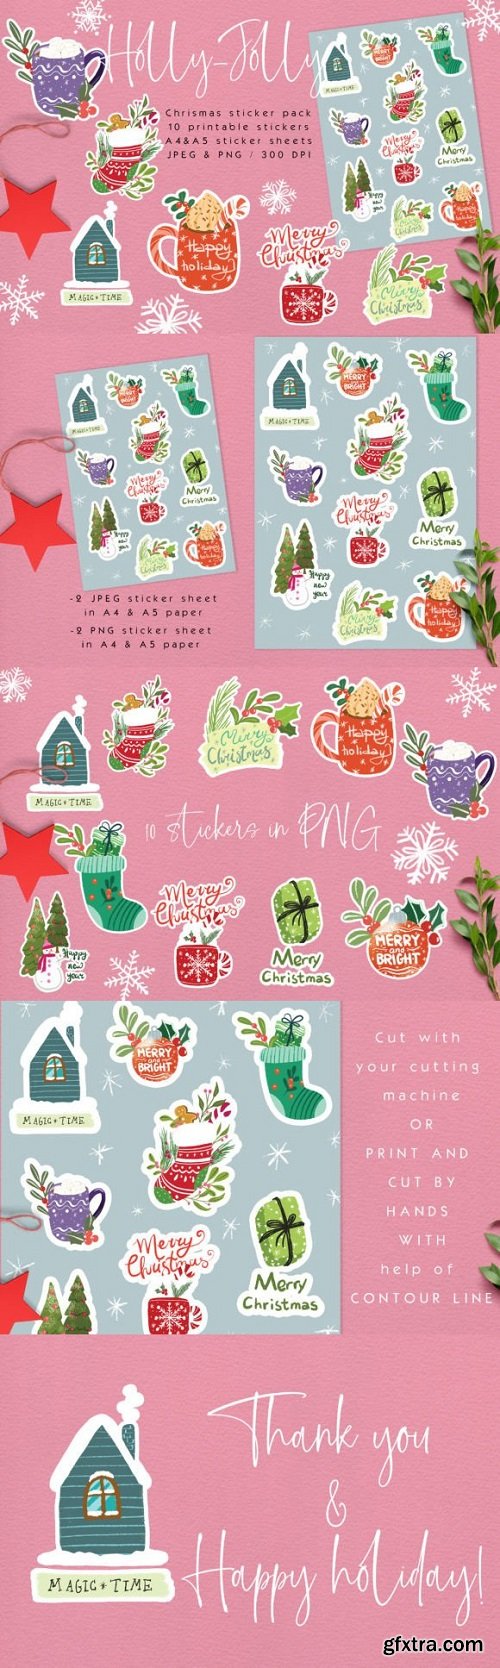 Holly-jolly Christmas Sticker Pack